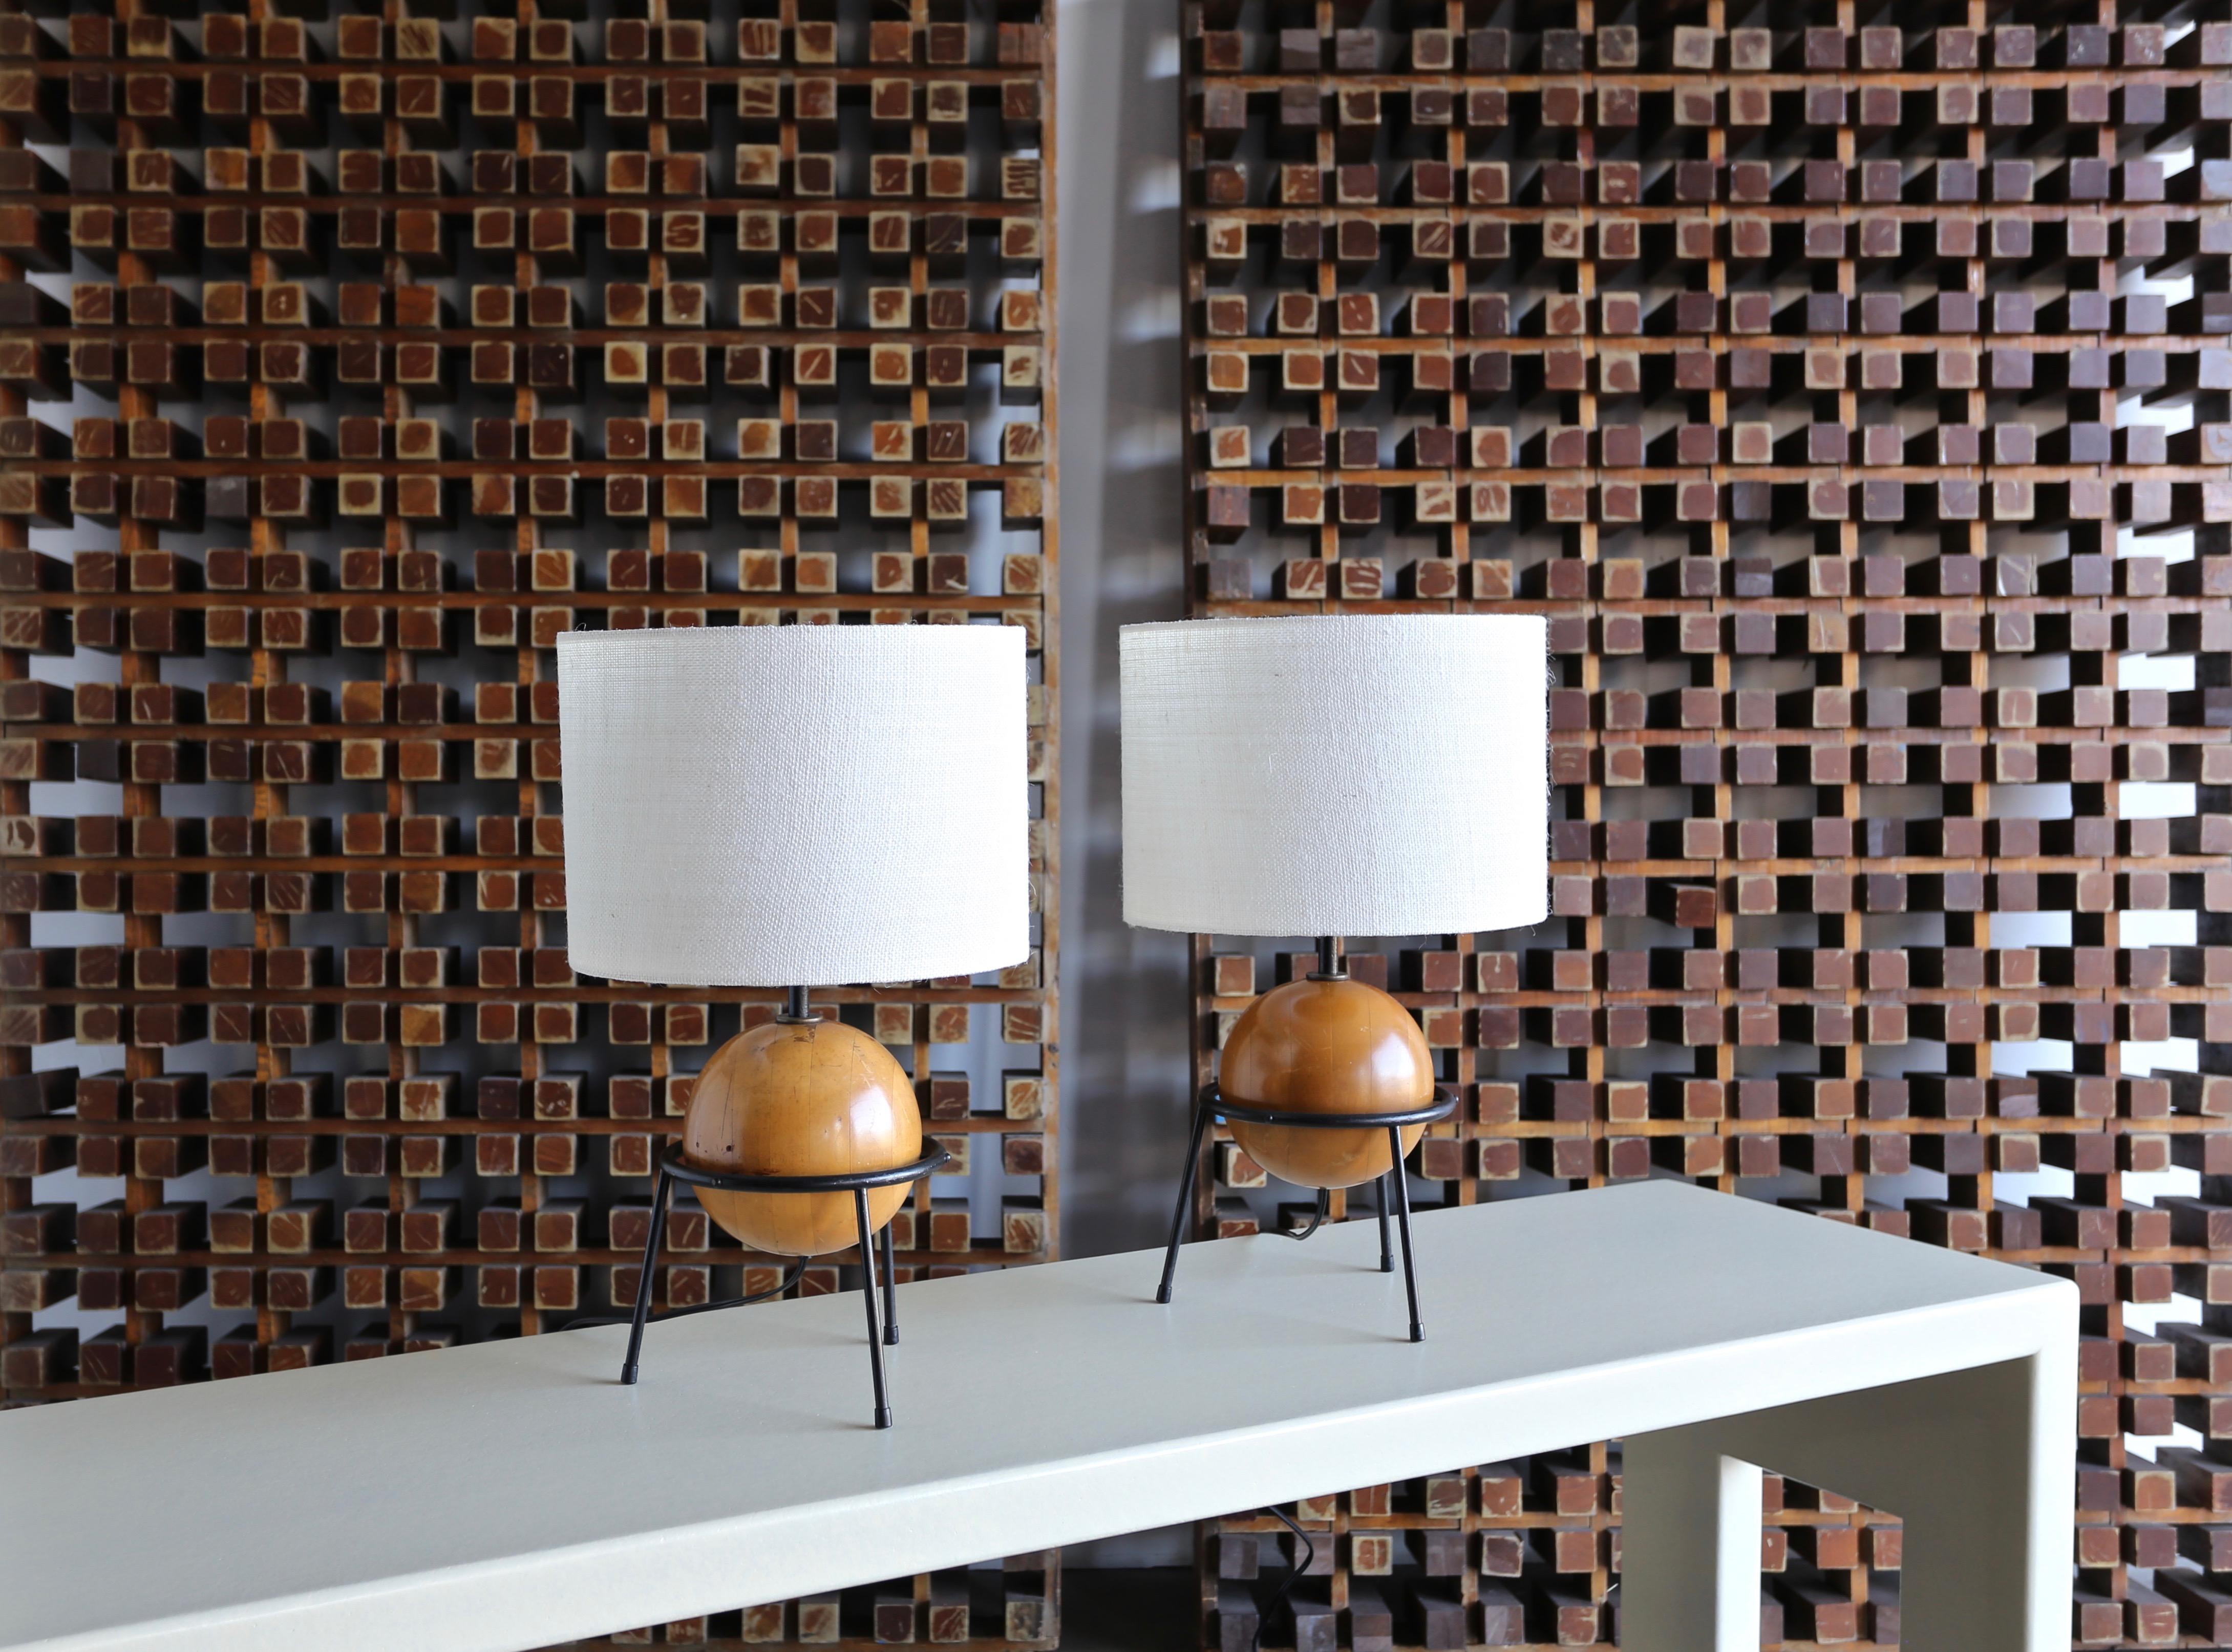 California Modern lamps by Albert Blake. Iron frame with a floating solid wood sphere. Produced in limited quantities by Blake’s company.

Like many designers of the period, Al Blake moved from the Midwest to California after serving in the Army